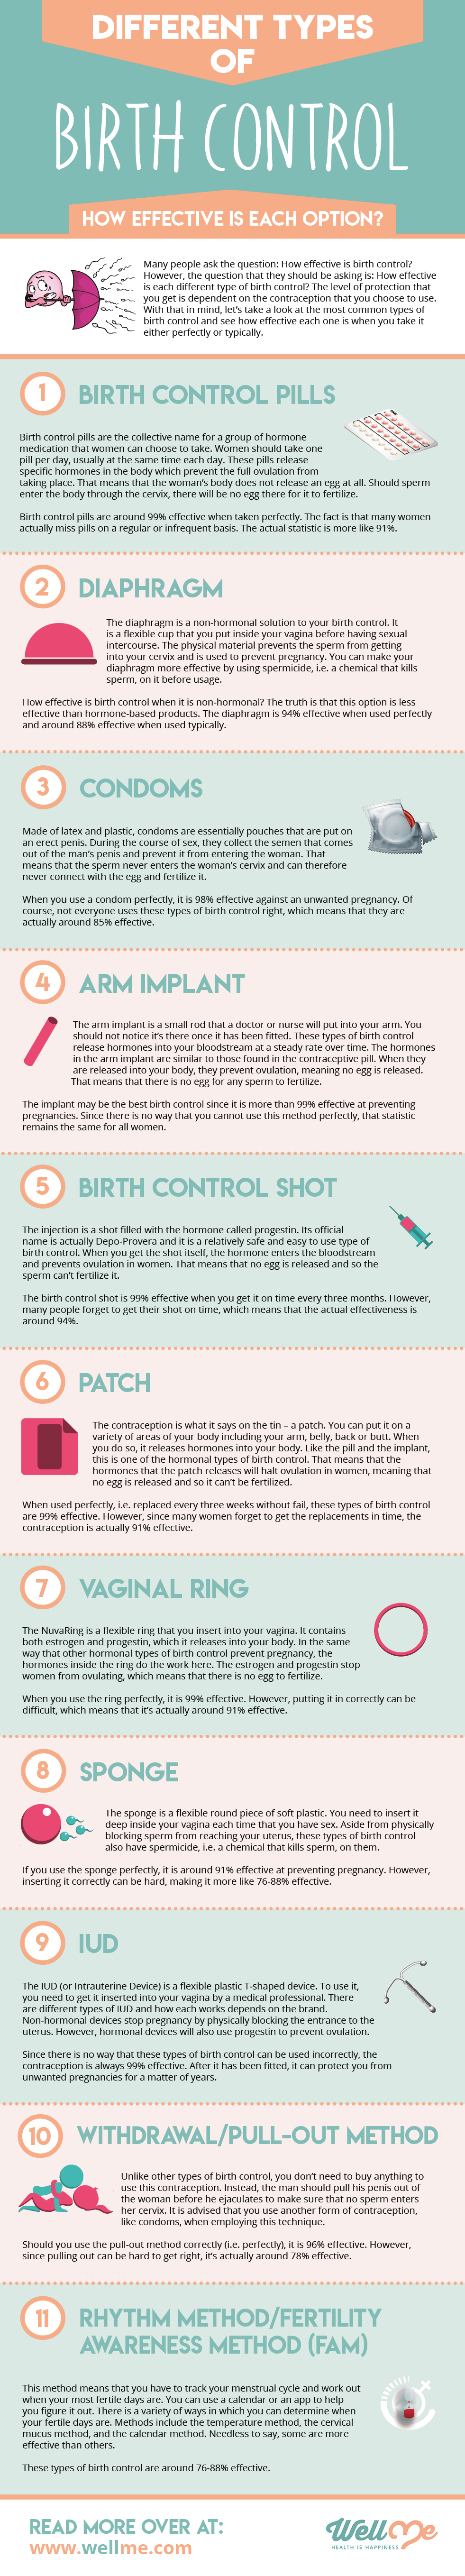 How Effective is Birth Control infographic